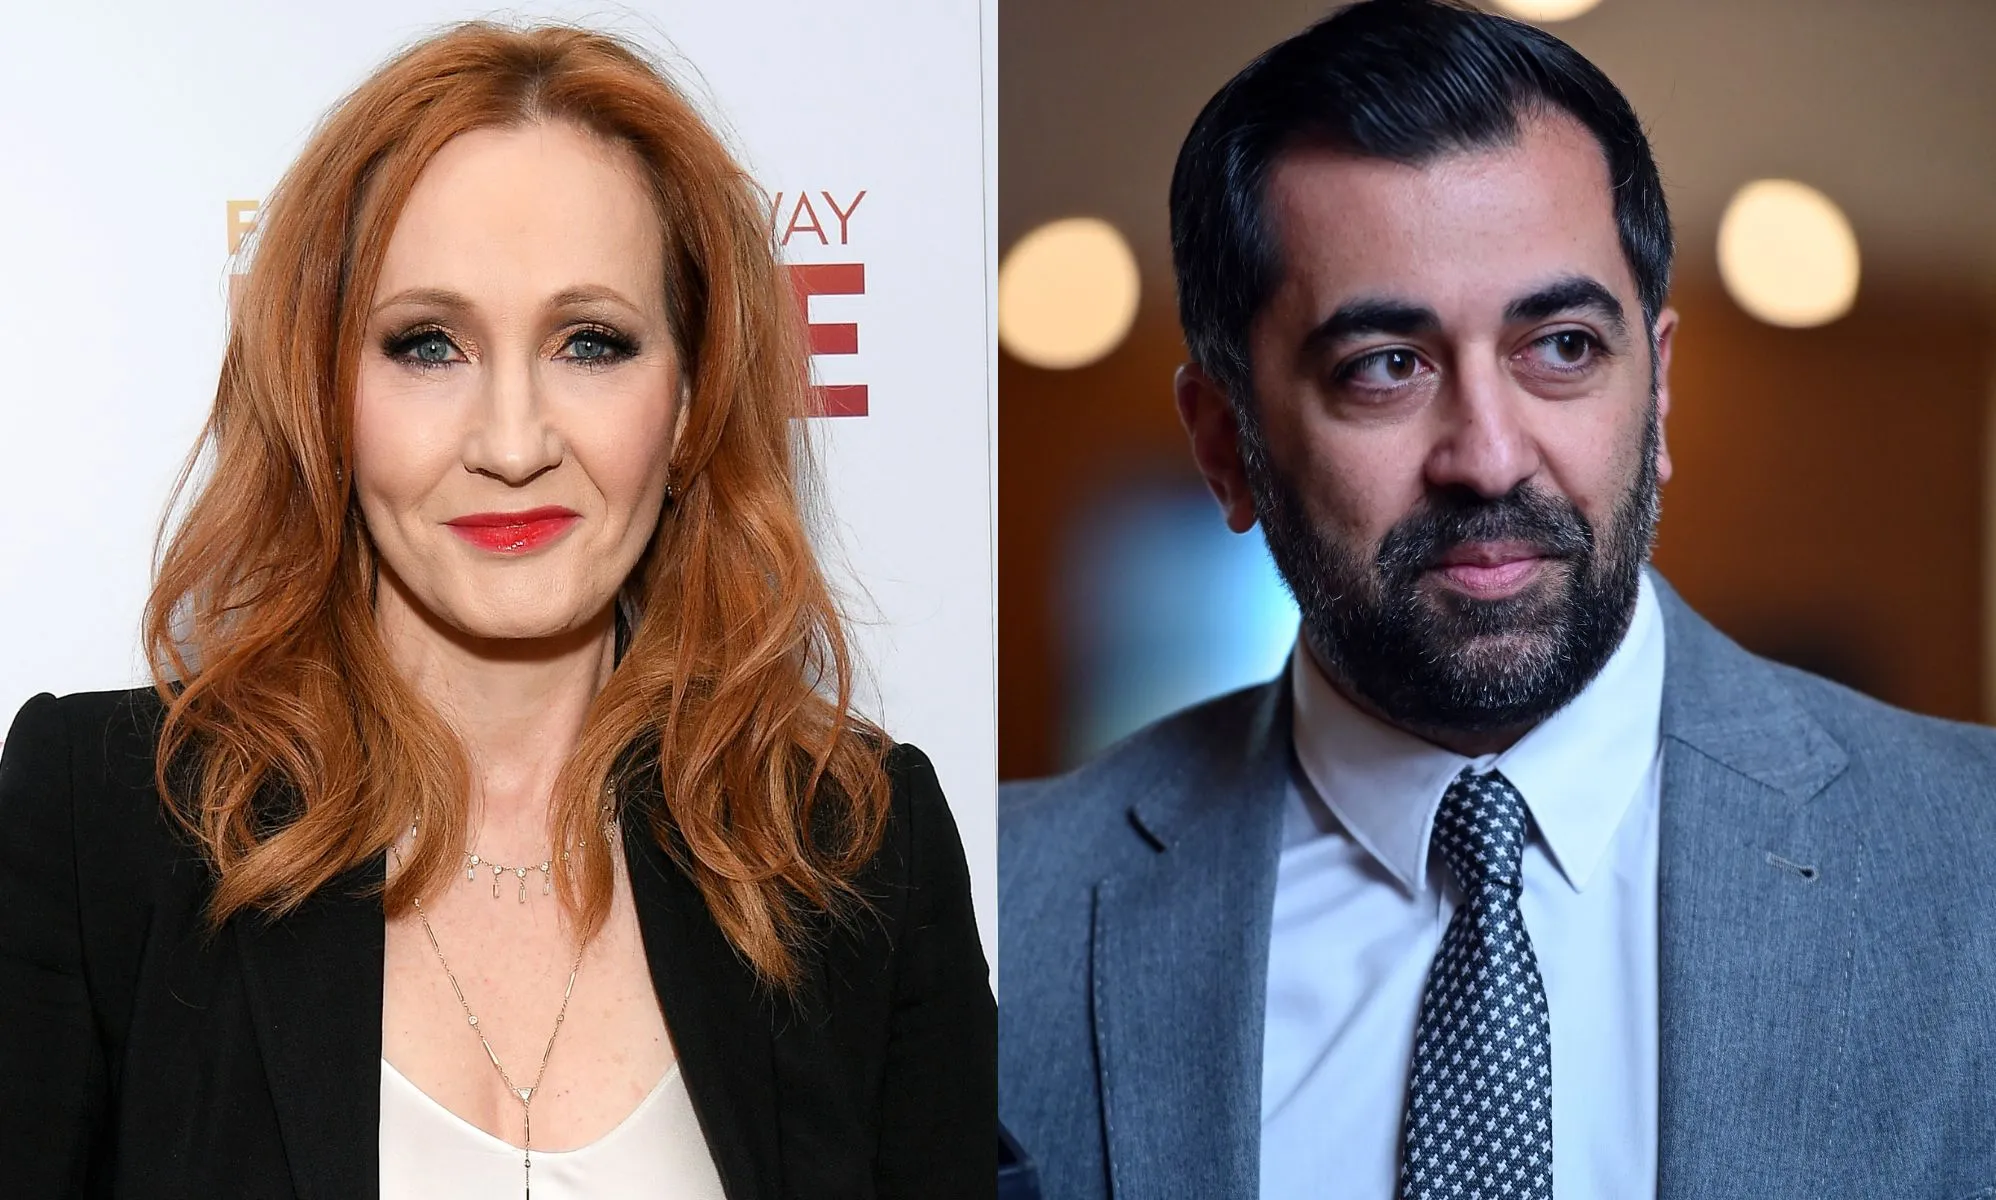 JK Rowling accuses Humza Yousaf of ‘authoritarianism’ after he calls her posts ‘offensive’